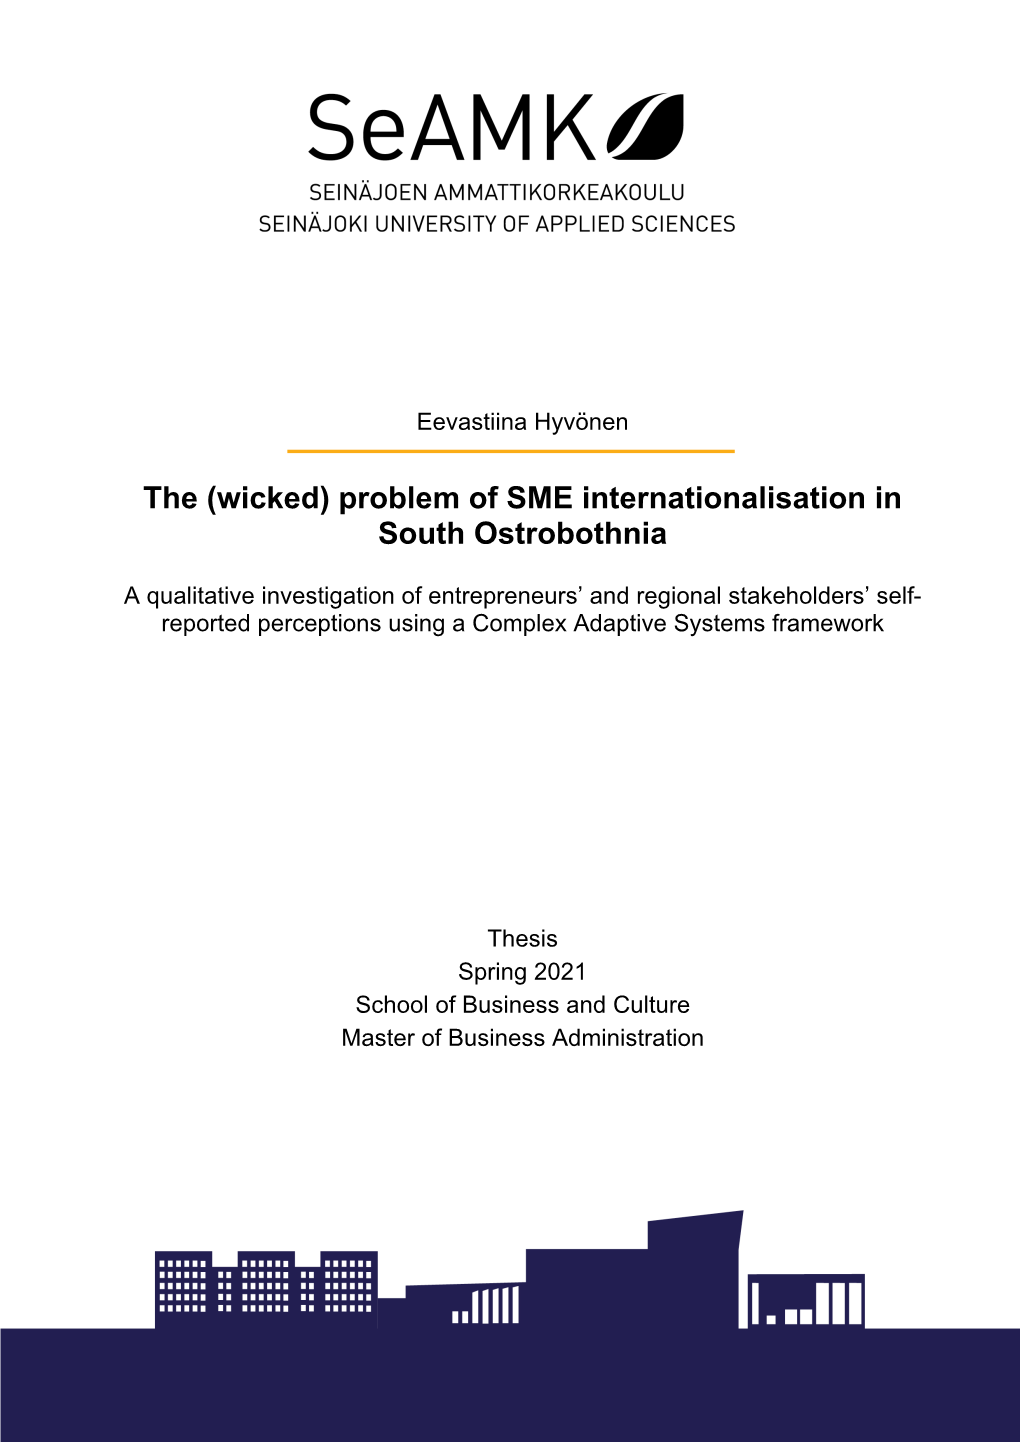 The (Wicked) Problem of SME Internationalisation in South Ostrobothnia